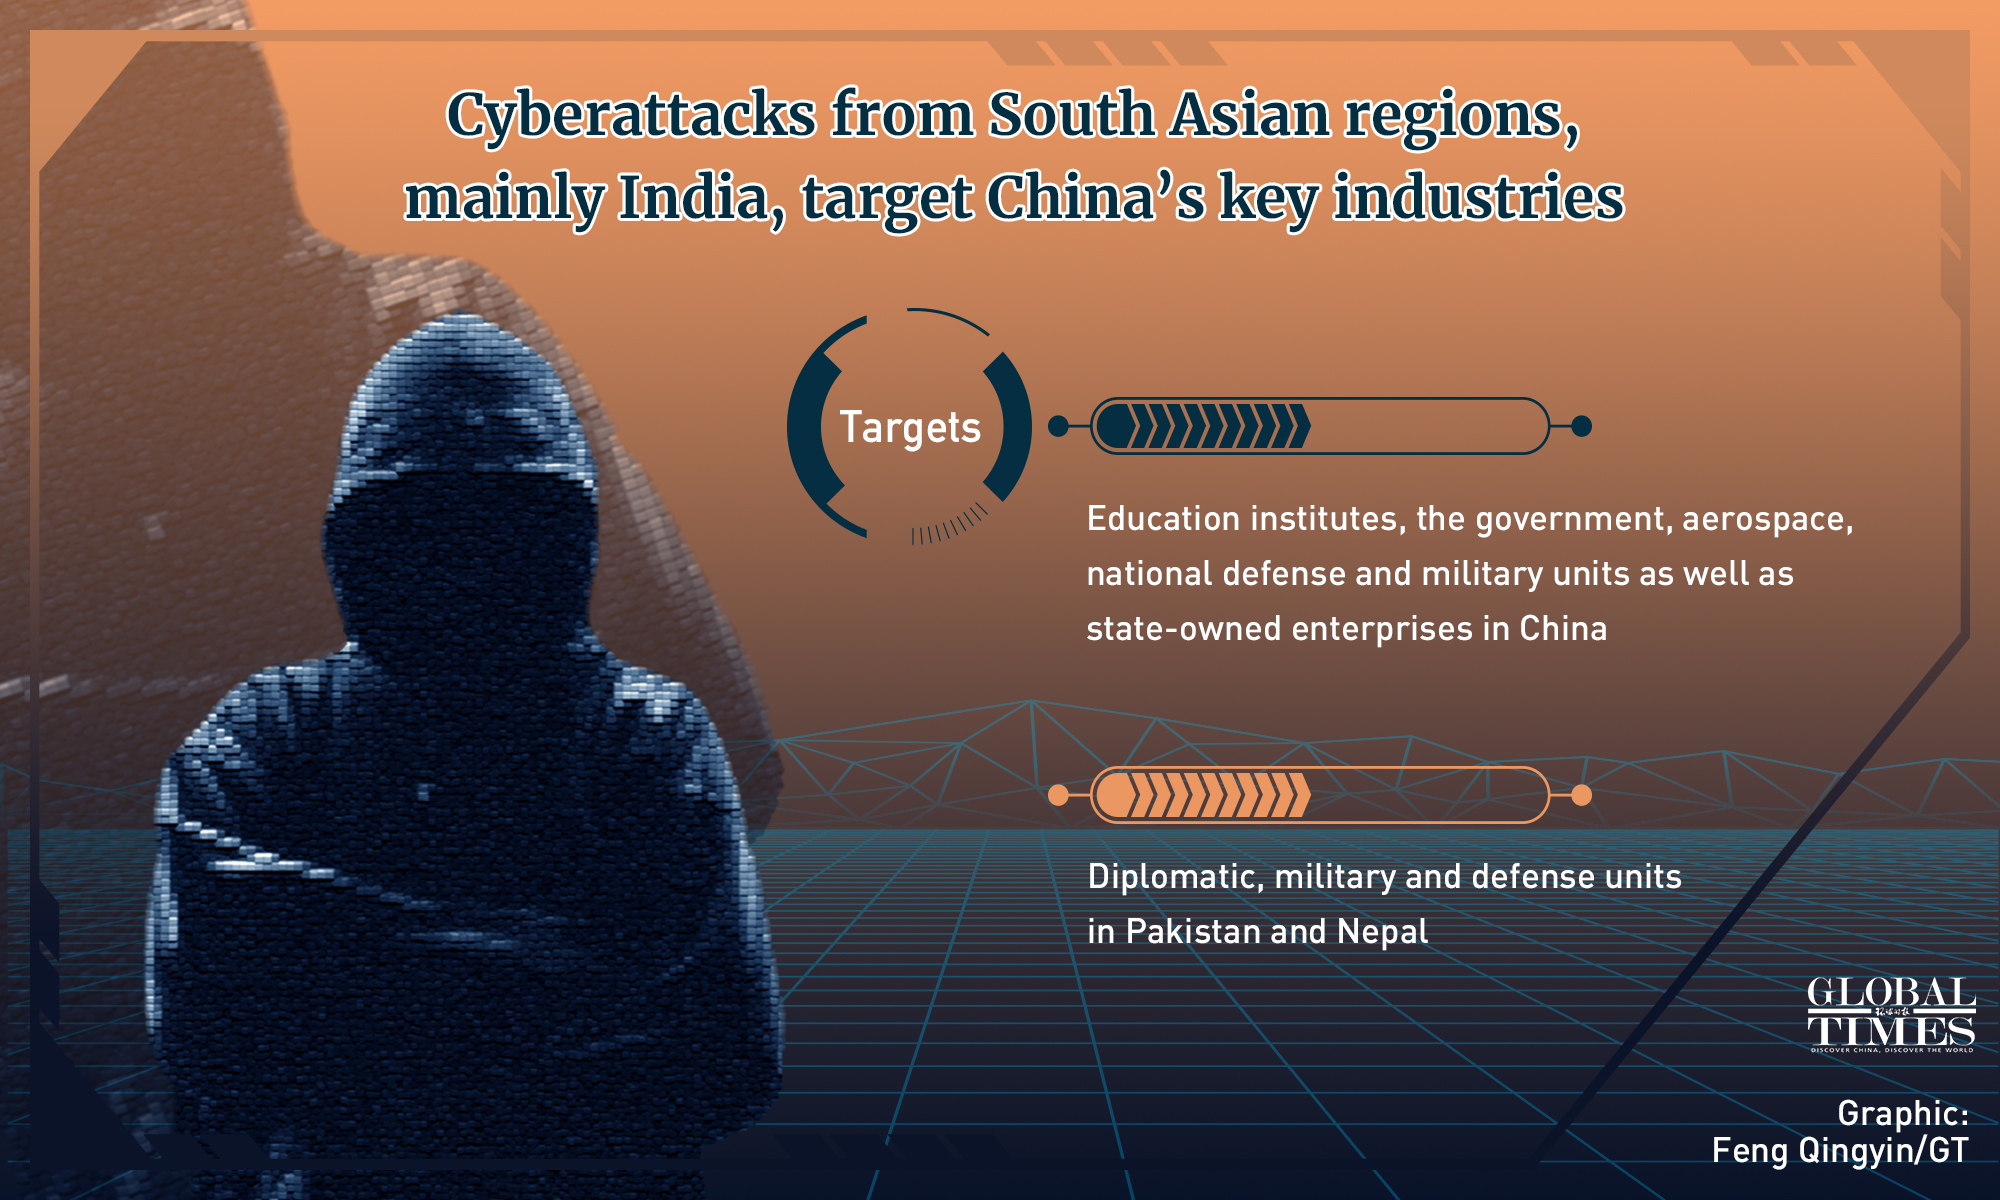 Cyberattacks from South Asian regions, mainly India, target China's key industries. Graphic: Feng Qingyin/GT